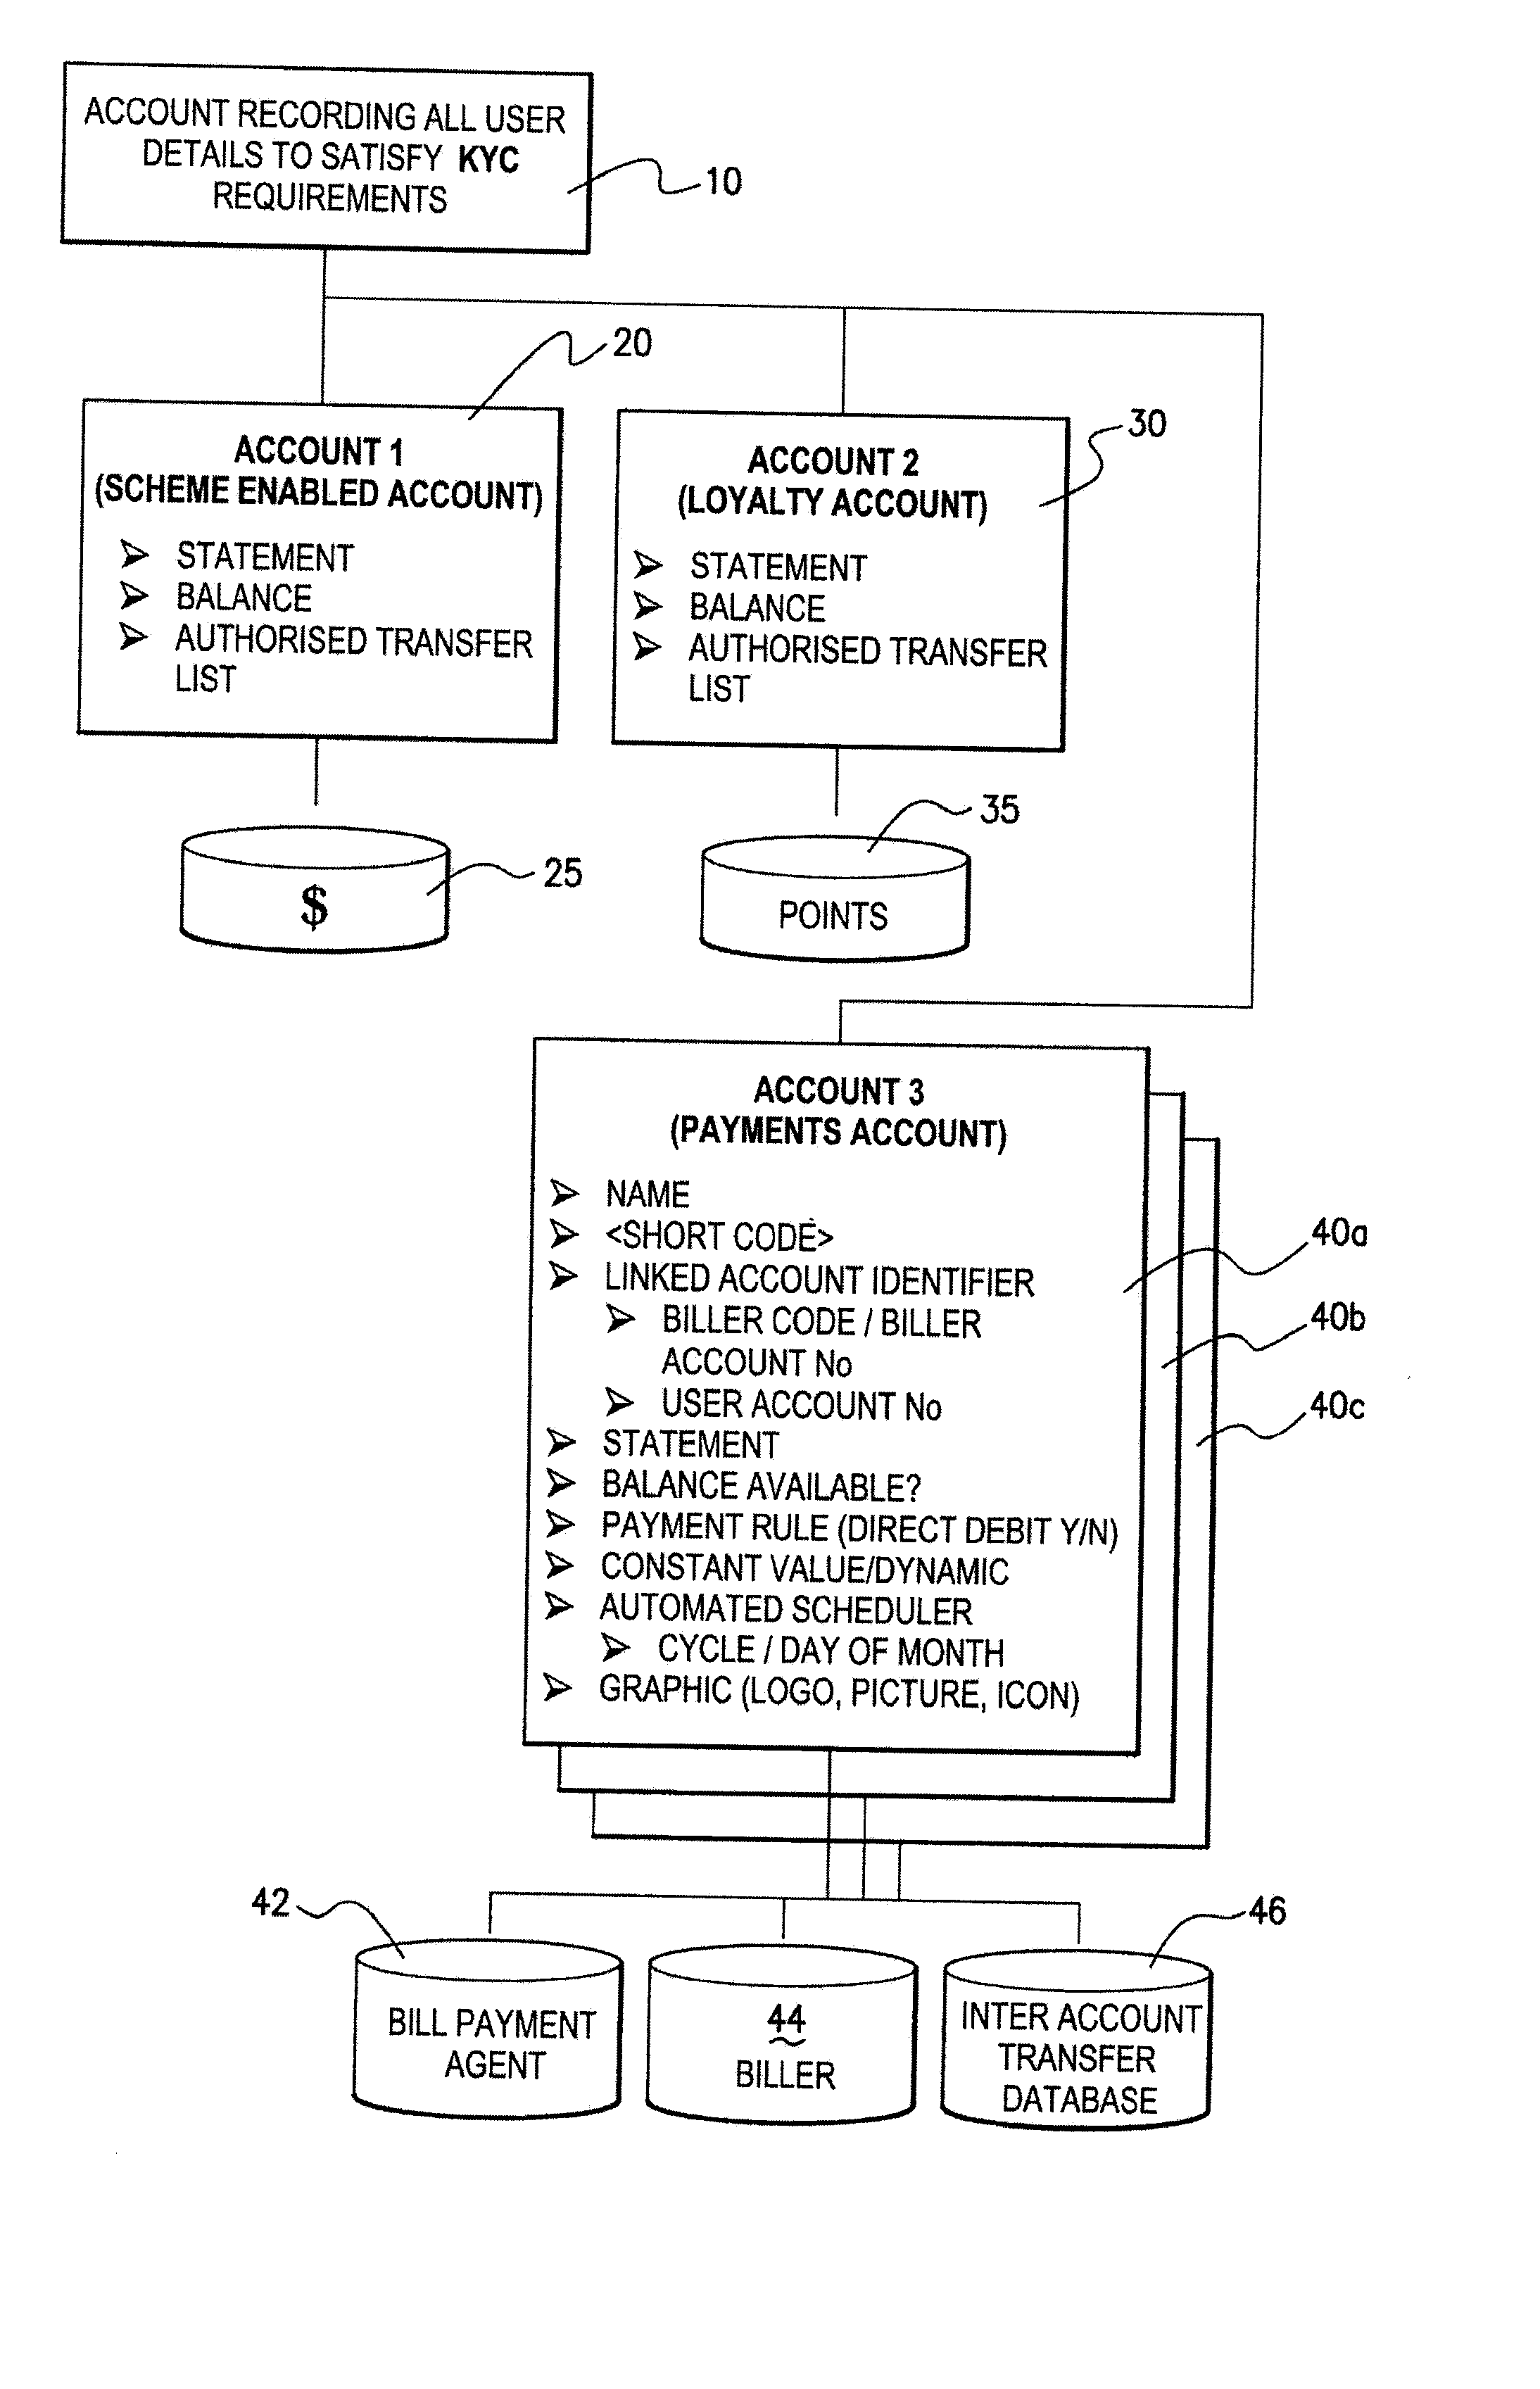 System and Method for Organising and Operating an Electronic Account